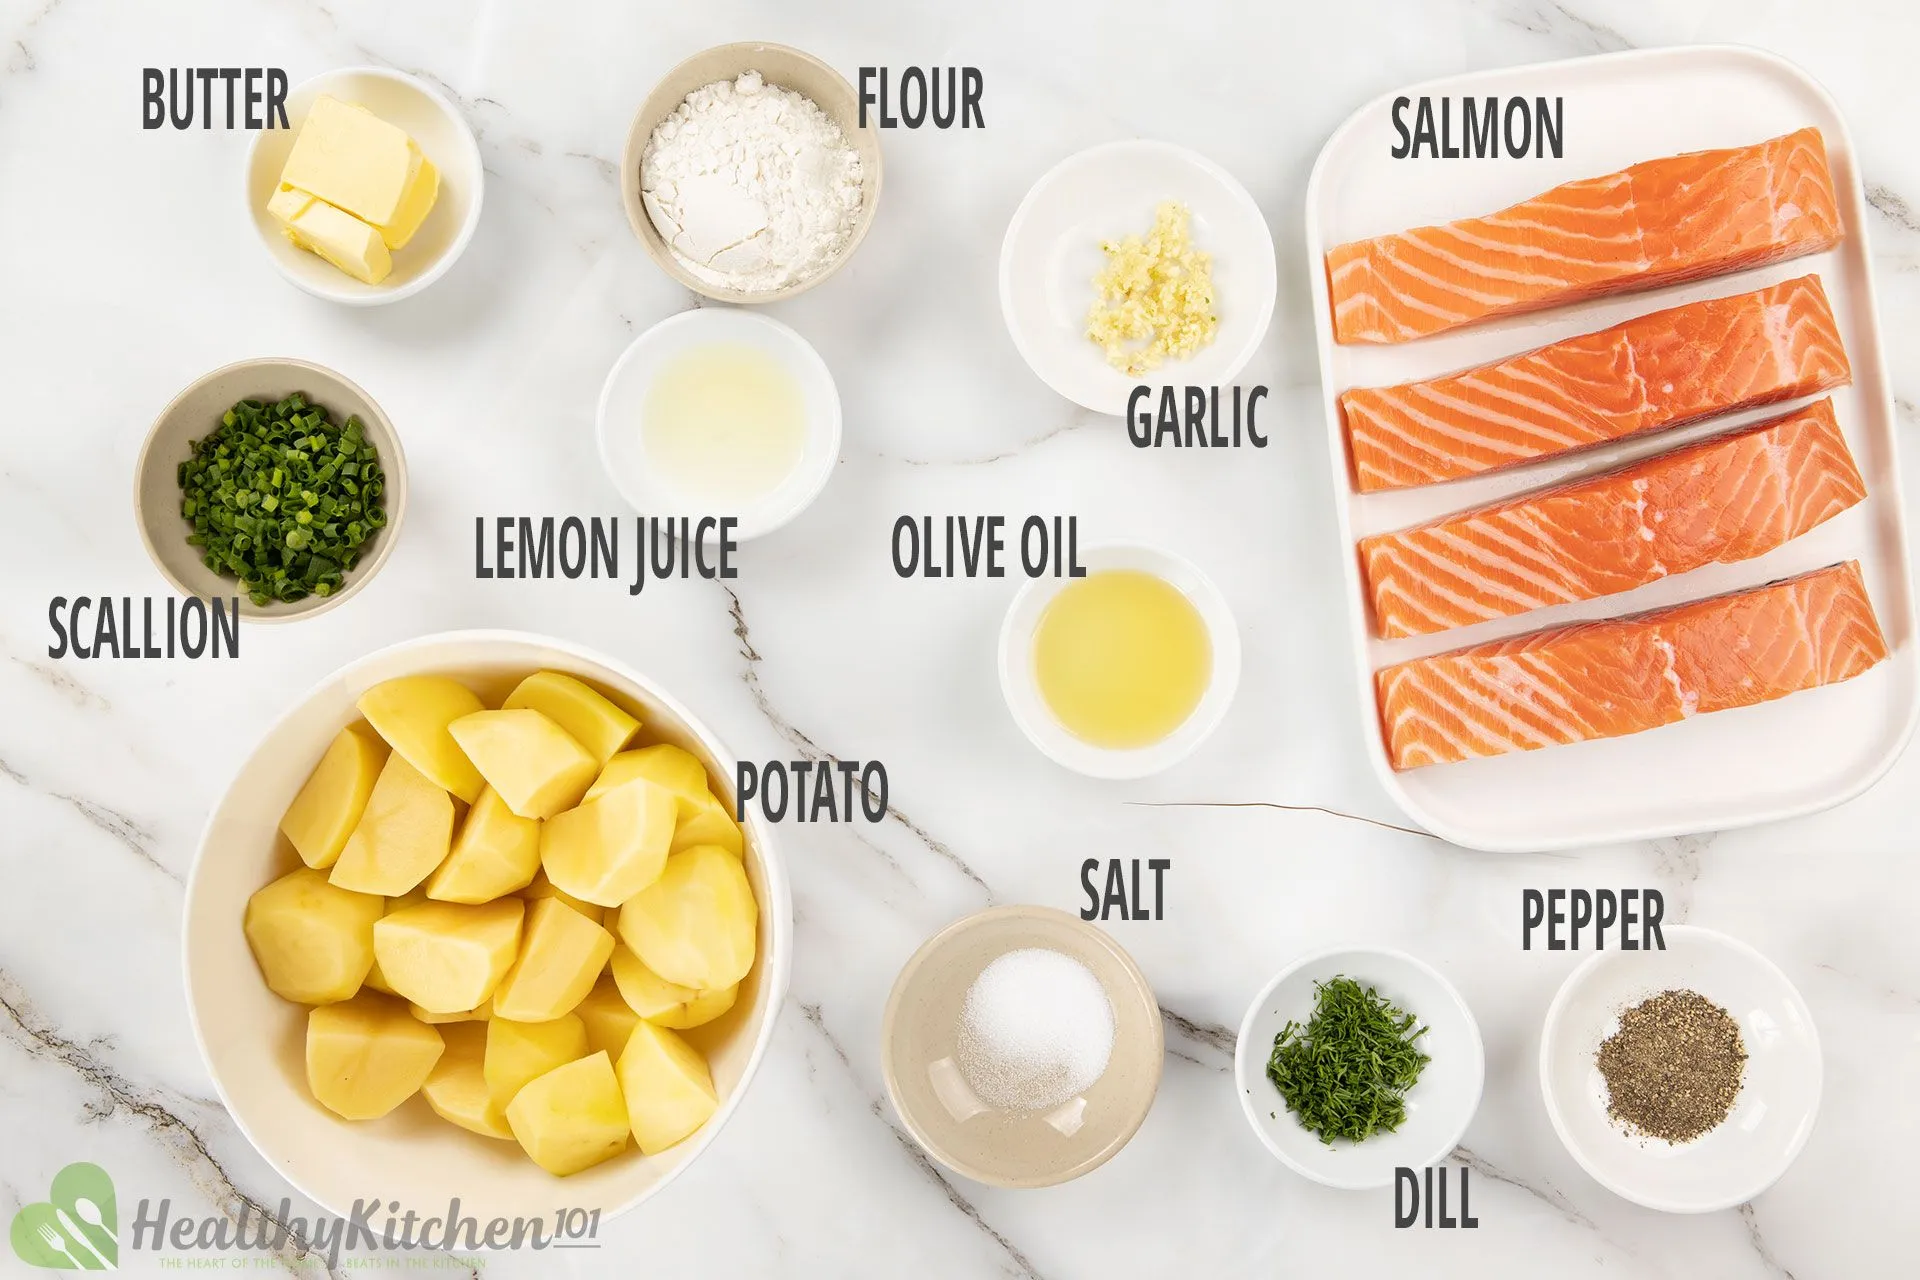 Salmon Meuniere Botw Salmon Meuniere Summarized By Plex Page Content Summarization I Was Actually Really Surprised When I Saw That Salmon Meuniere Was A Dish You Could Make In The